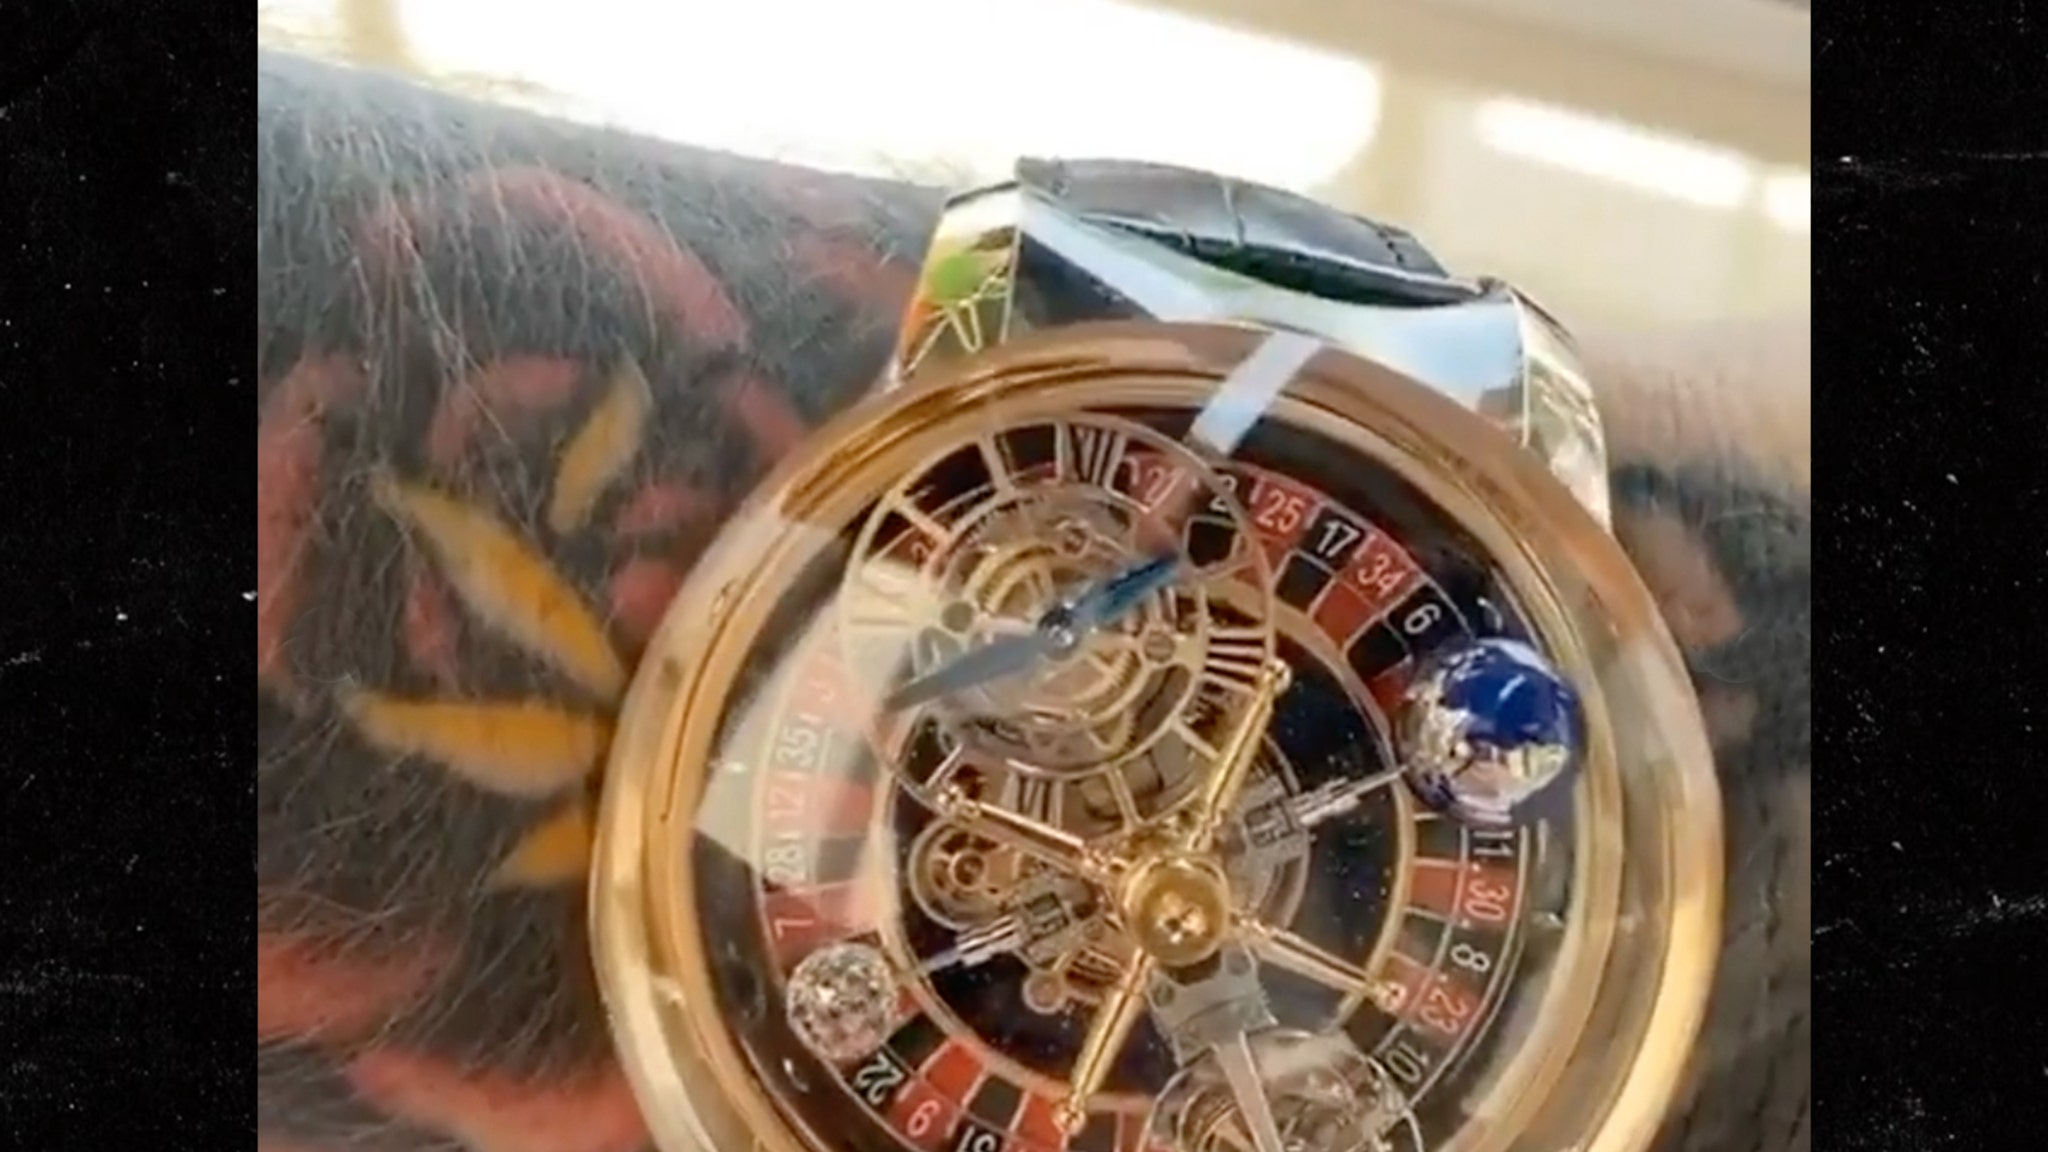 A Look at the Astronomia Casino Watch Drake and Conor McGregor Both Love